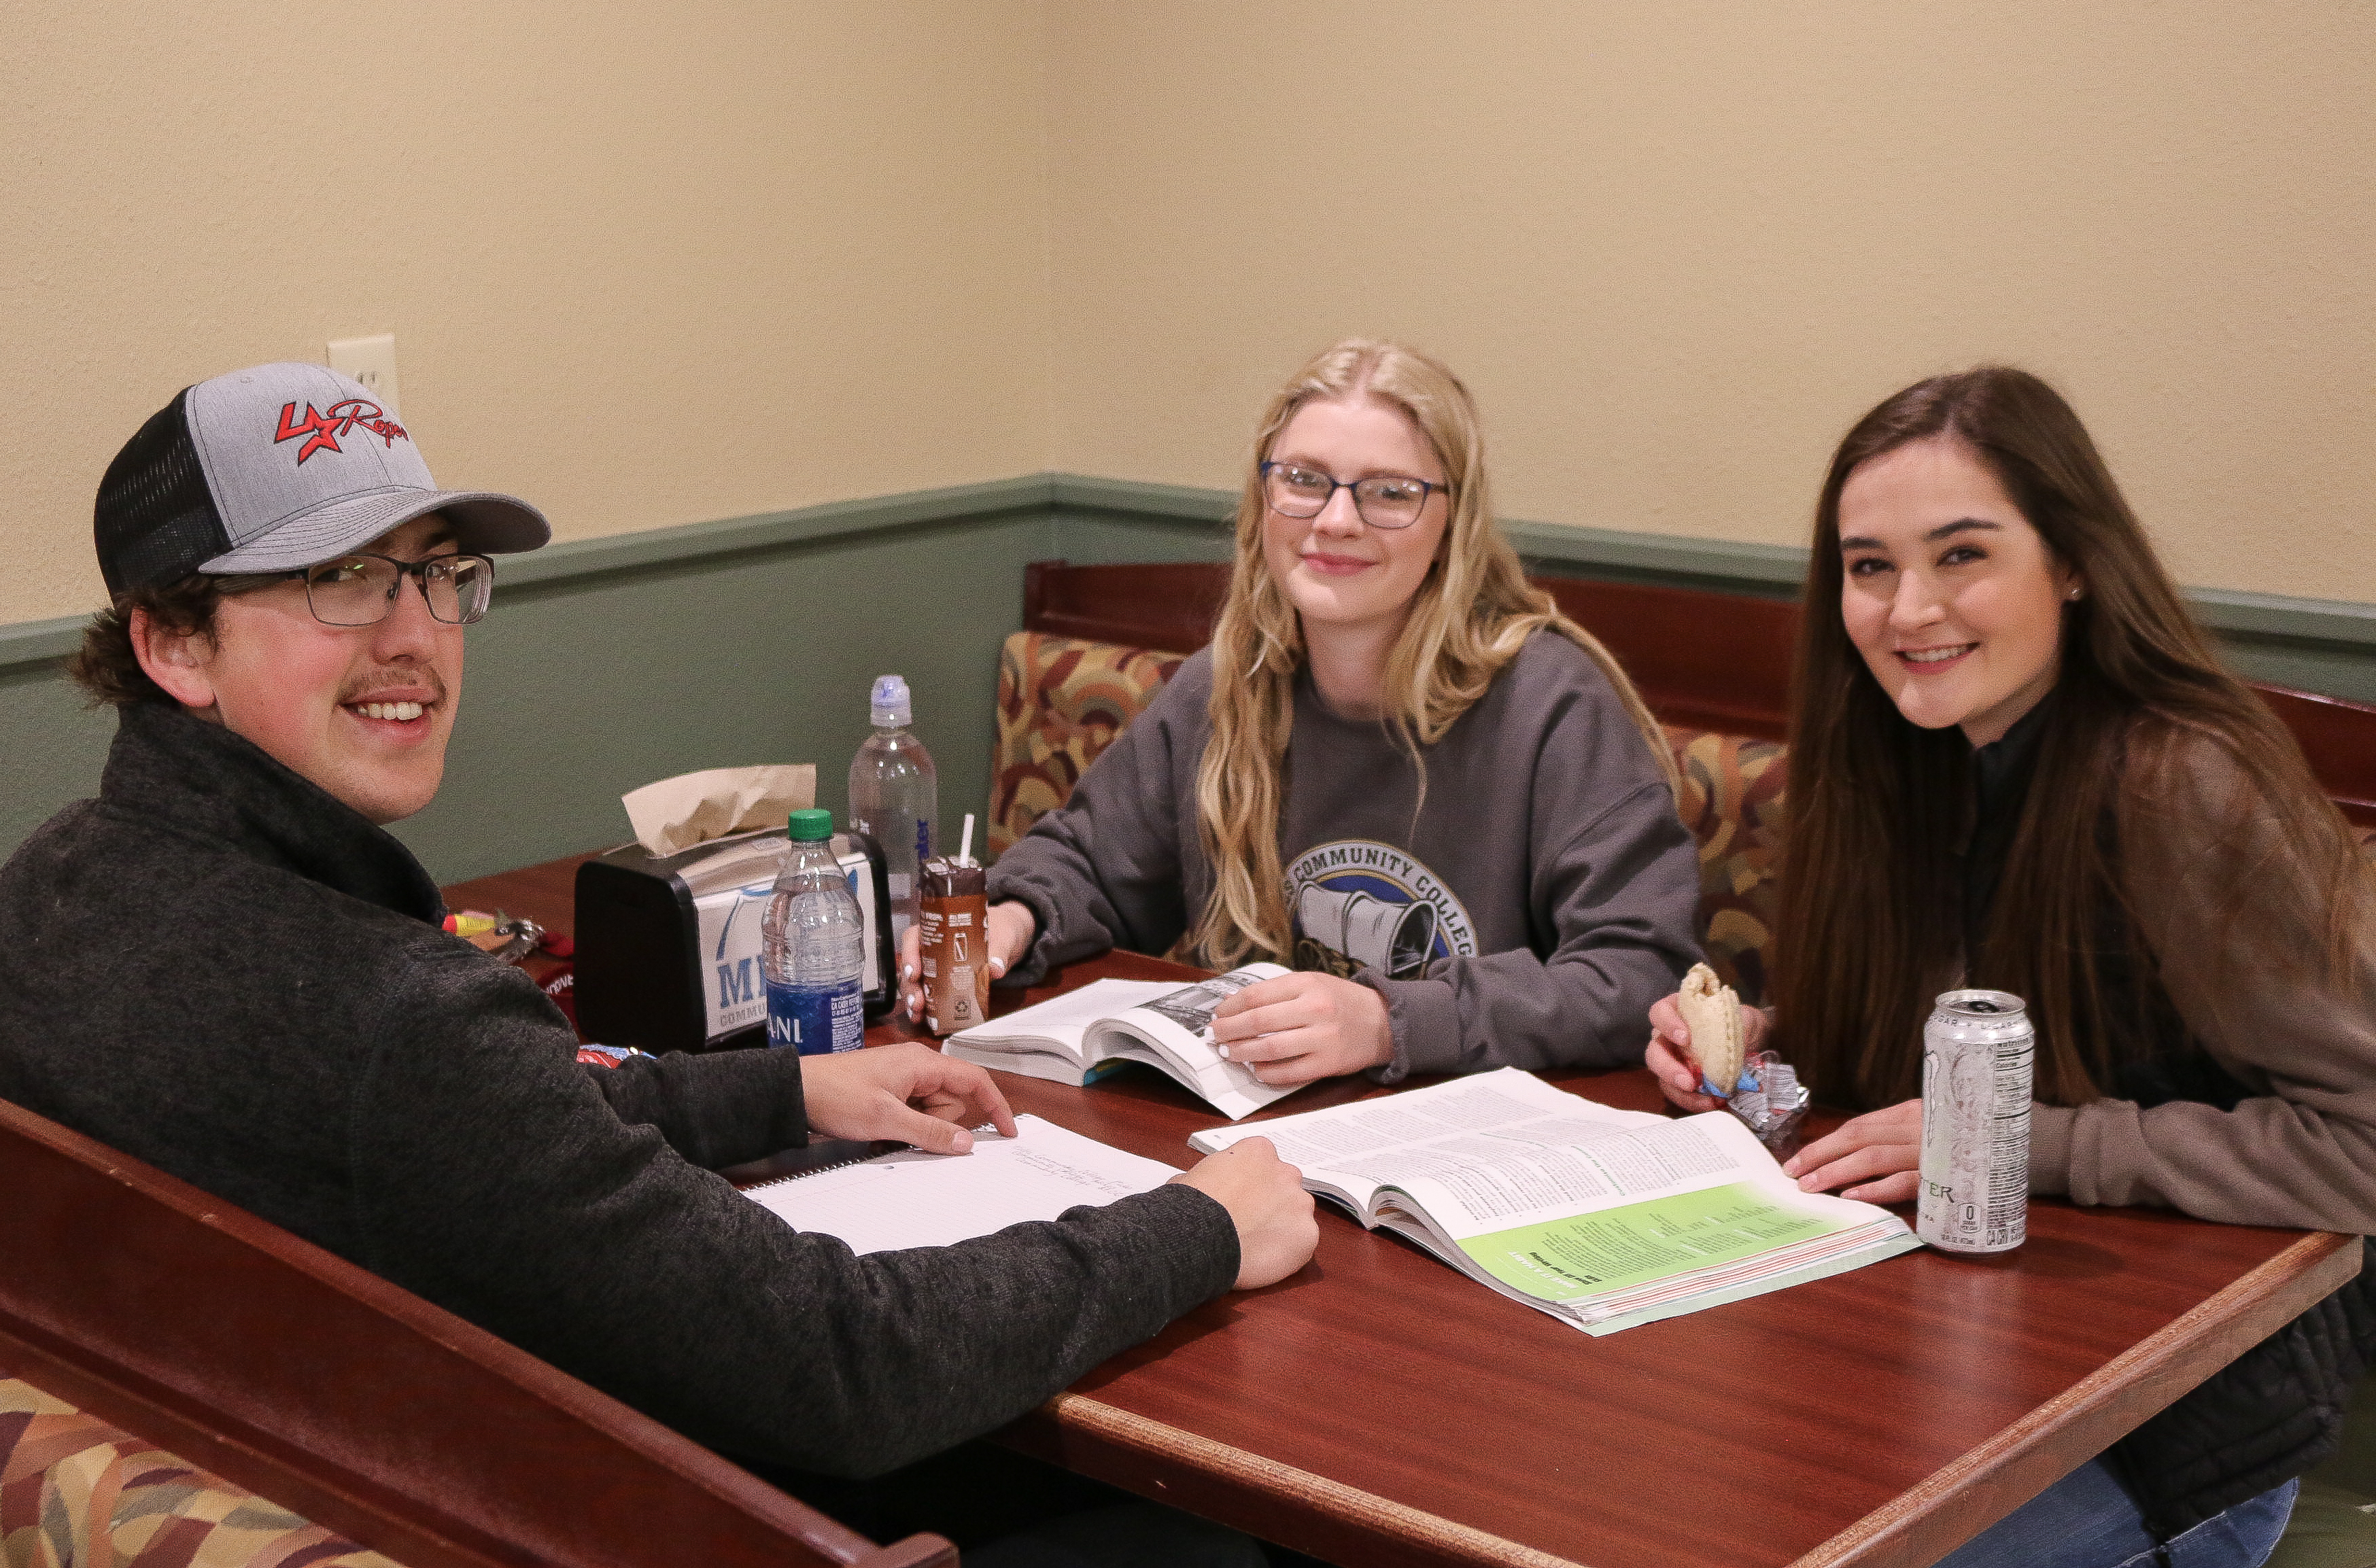 Three students sitting in cafe booth smiling